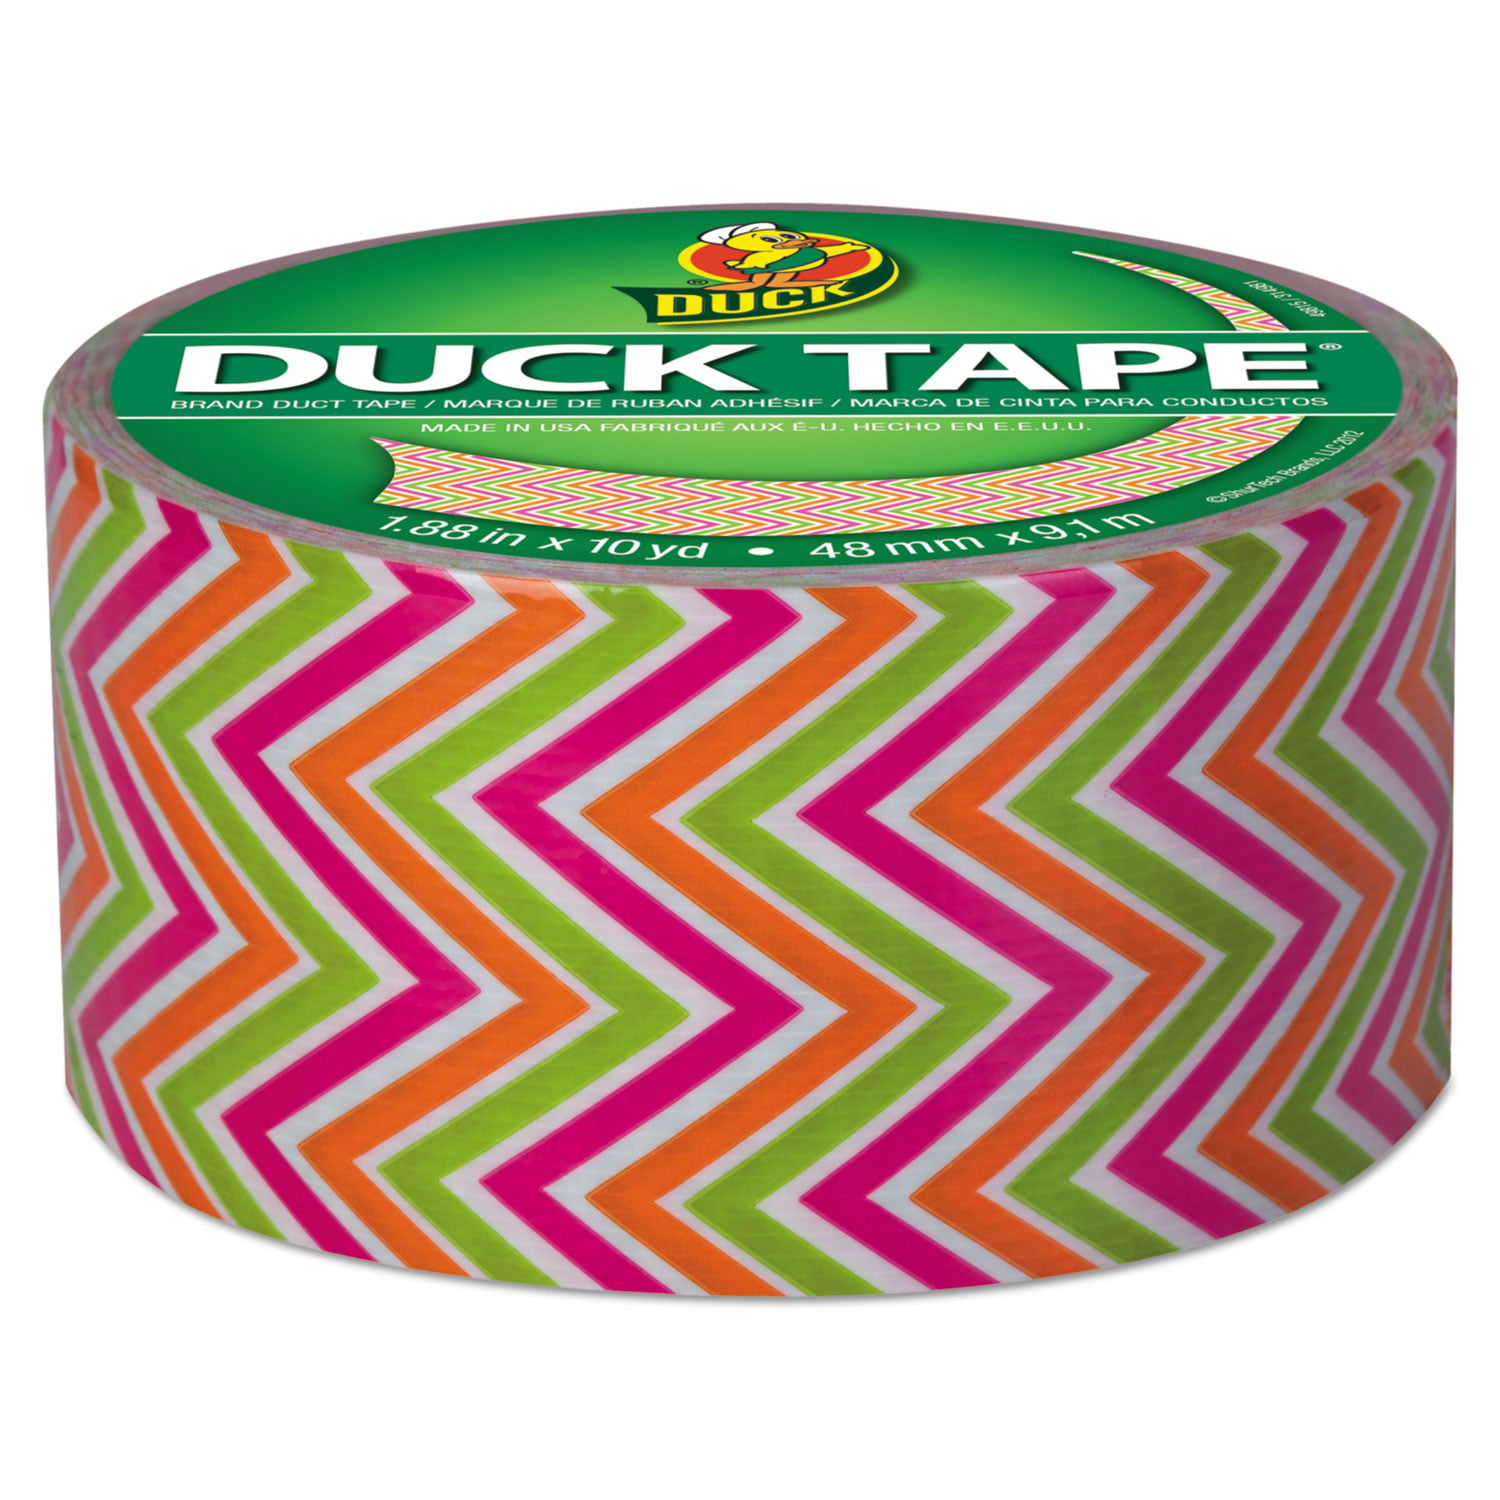 11.39 x 11.65 Shurtech Patterned Duck Tape 1.88-inch x 10yd-Checkerboard Other 